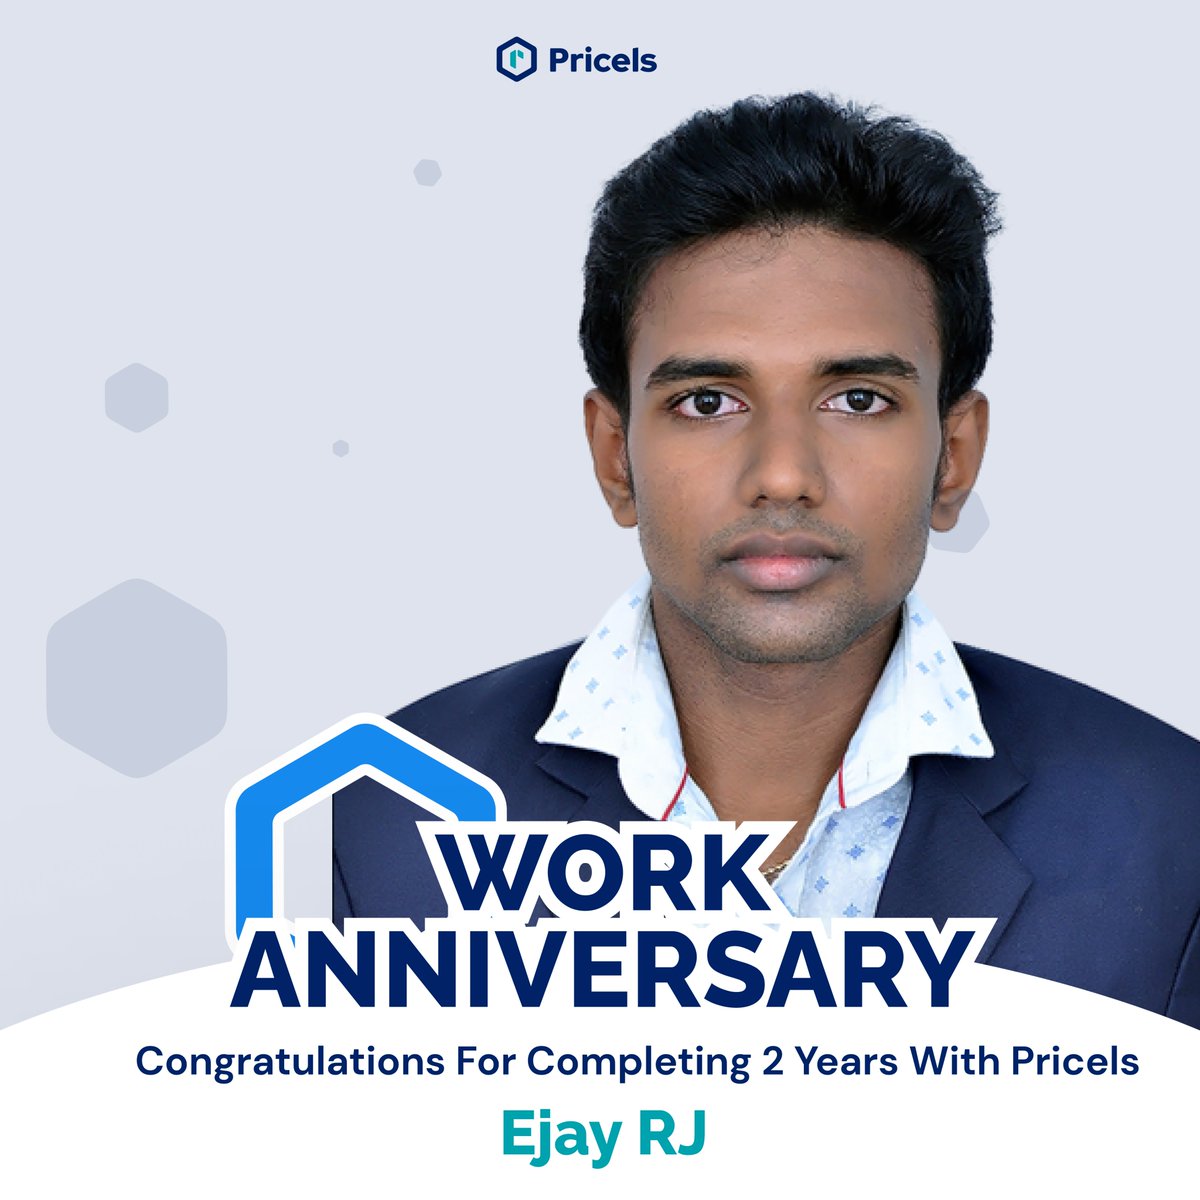 Congratulations Aastha and Ejay on your Work Anniversary! 🎉
We thank you for being a part of Pricels's journey over these years and we wish you many more years of success.
#pricels #pricelsproud #pricelsLimited #salesforcepartner #salesforcepartners  #workanniversary